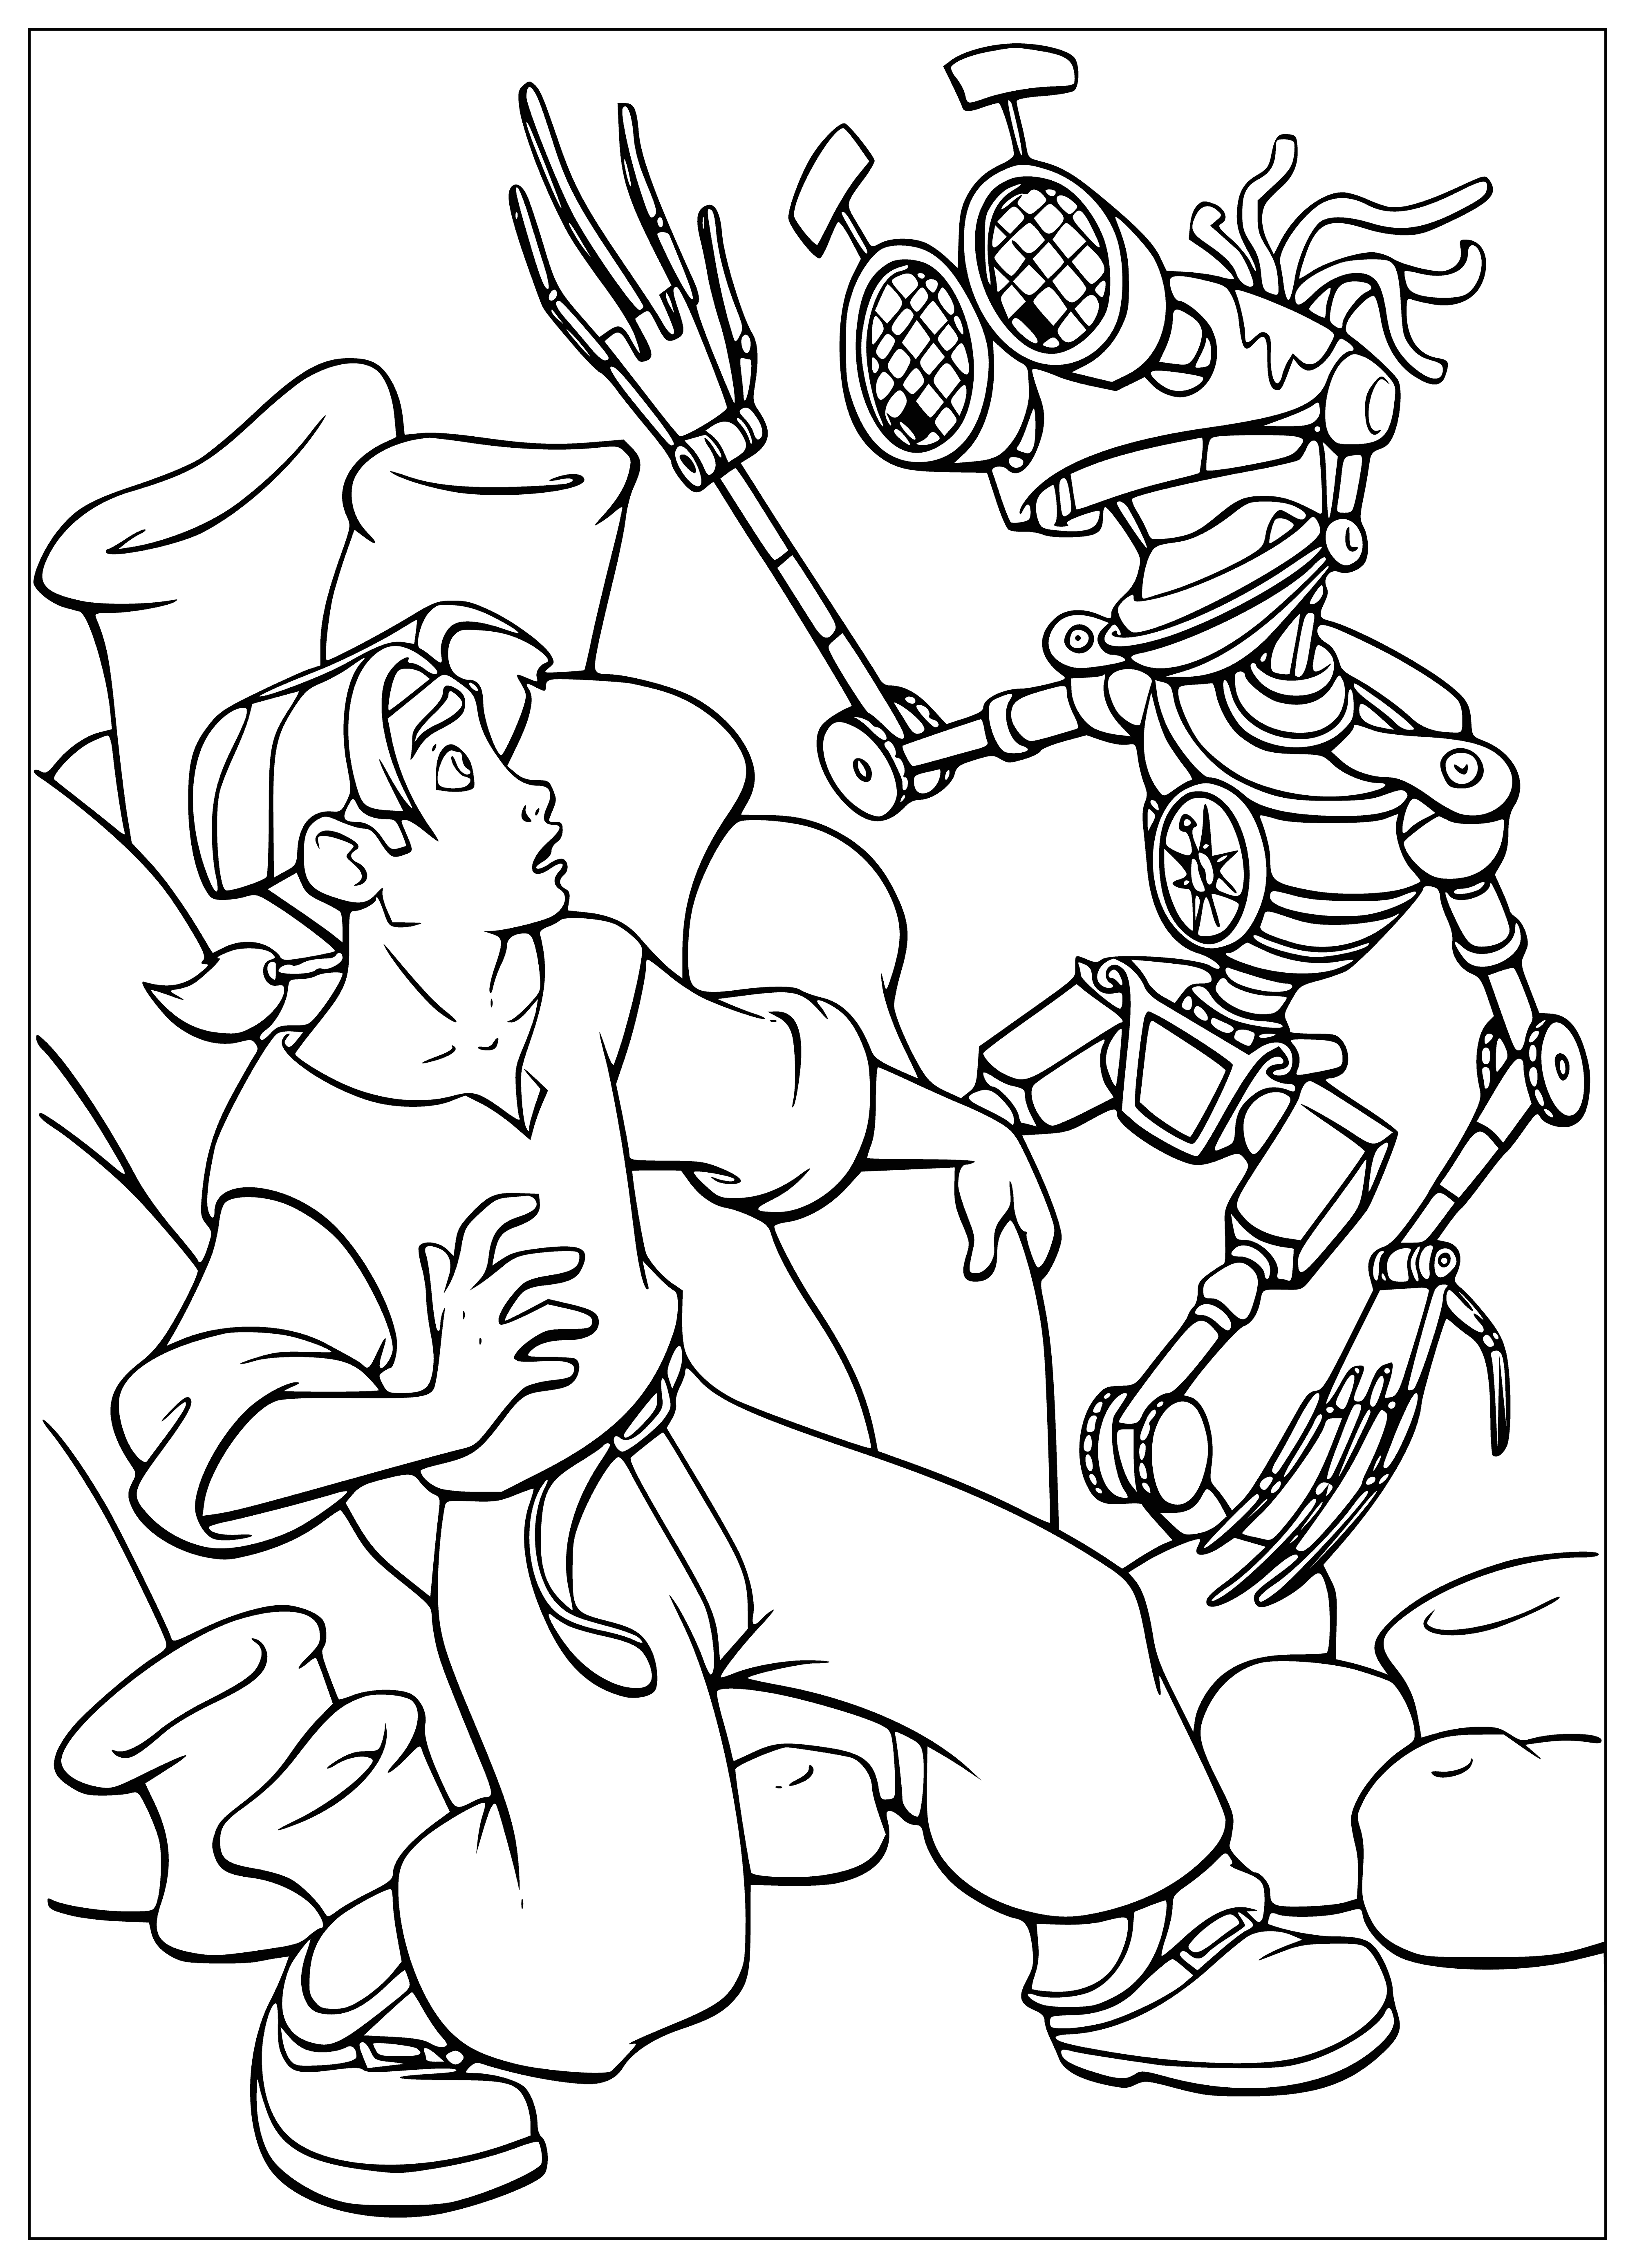 coloring page: Coloring page has green planet with smaller planets and a bright star in foreground.